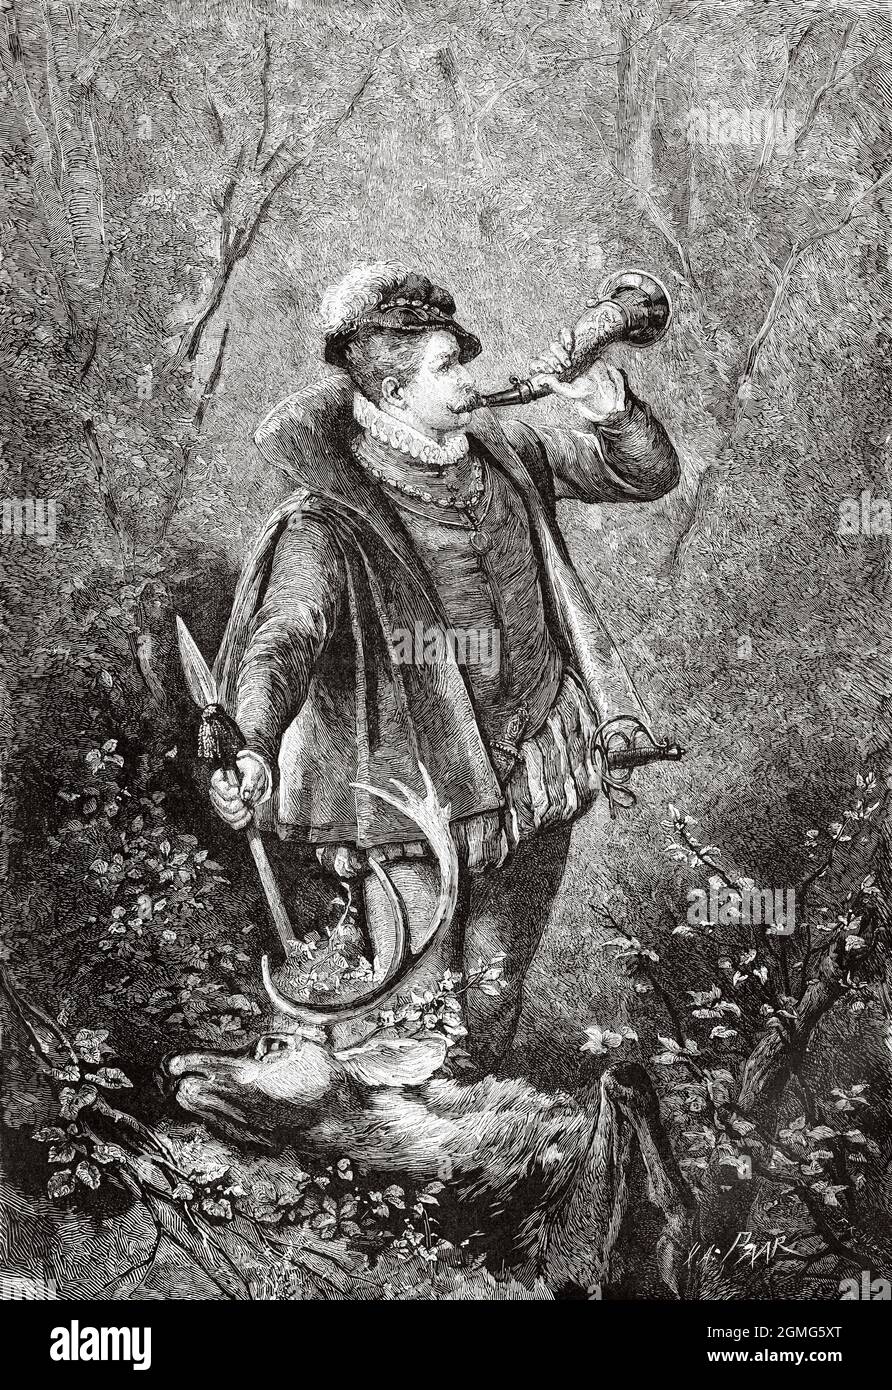 The dead deer. A hunter blows the horn to warn that he has found the downed deer, painting by Johannes Raphael Wehle (1848-1936) German painter and illustrator. Old 19th century engraved illustration from La Ilustración Artística 1882 Stock Photo